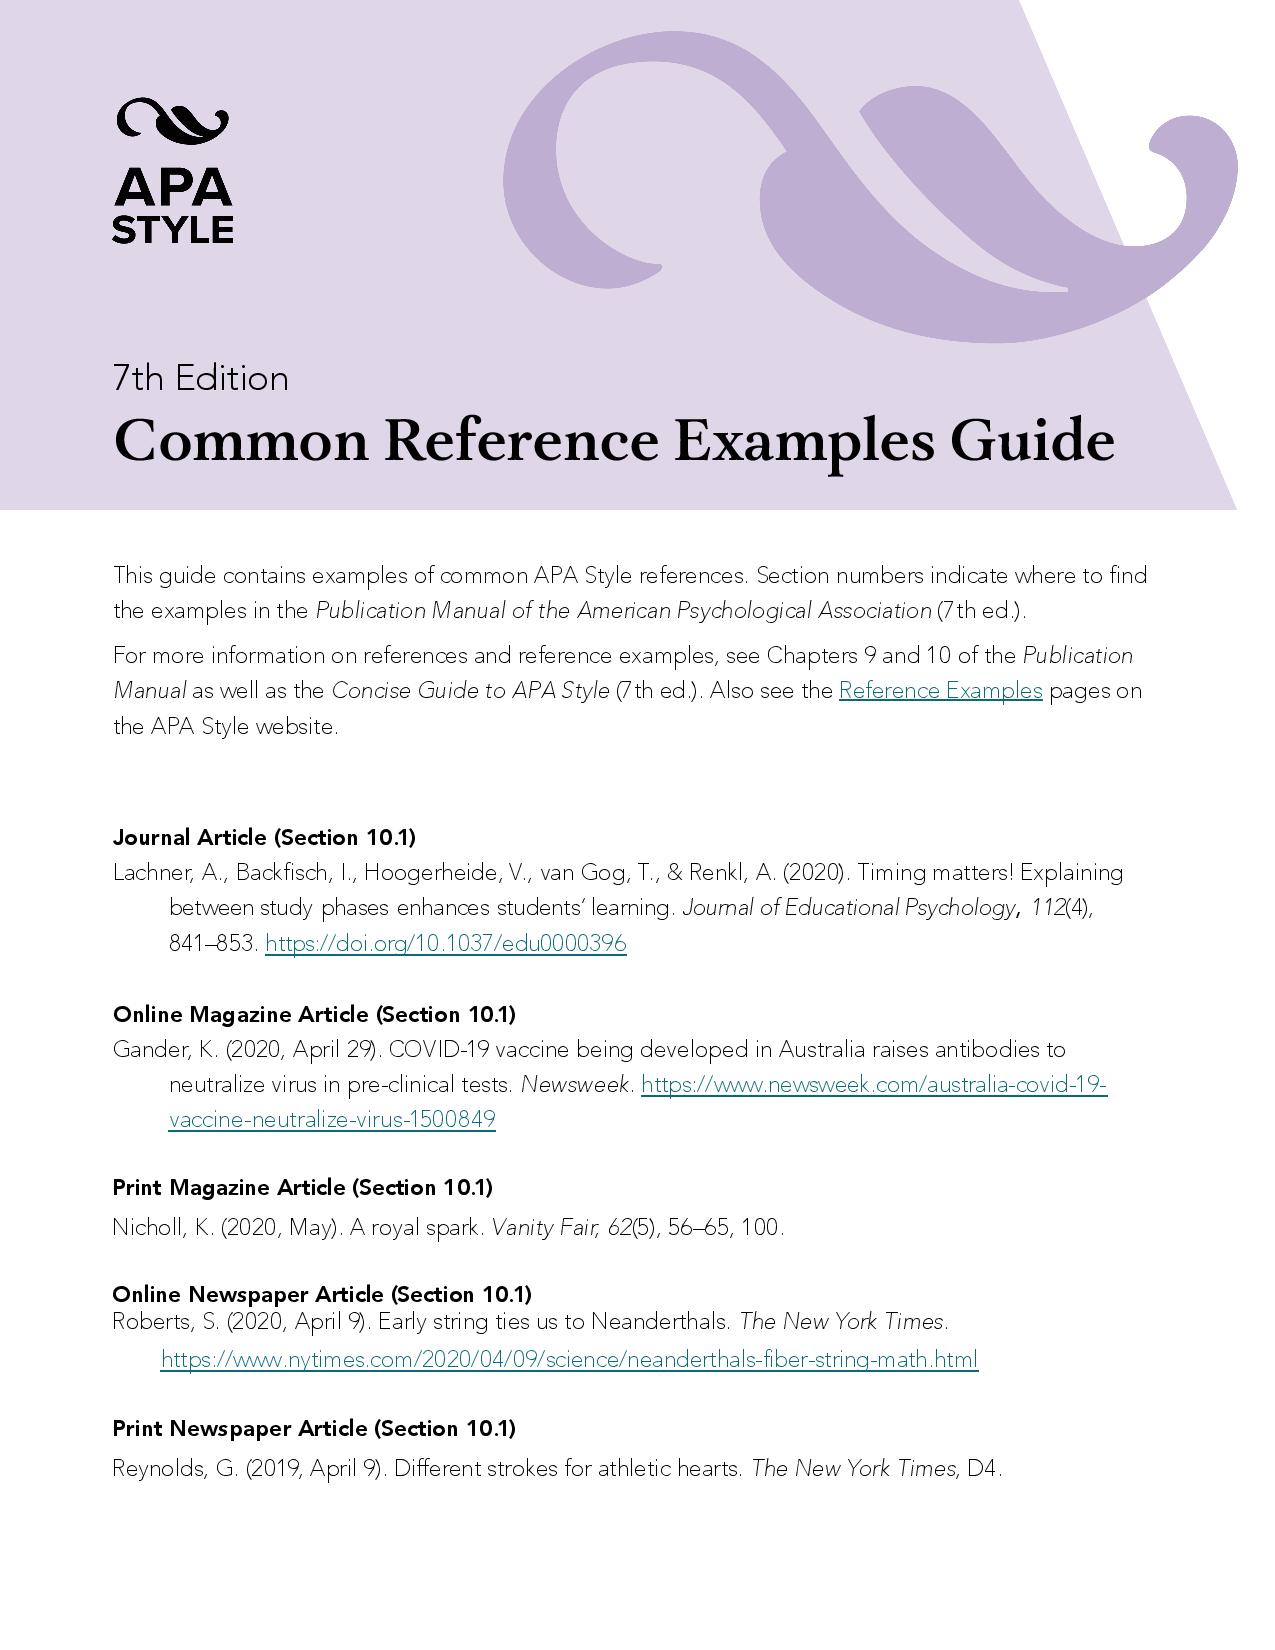 apa style guide book review